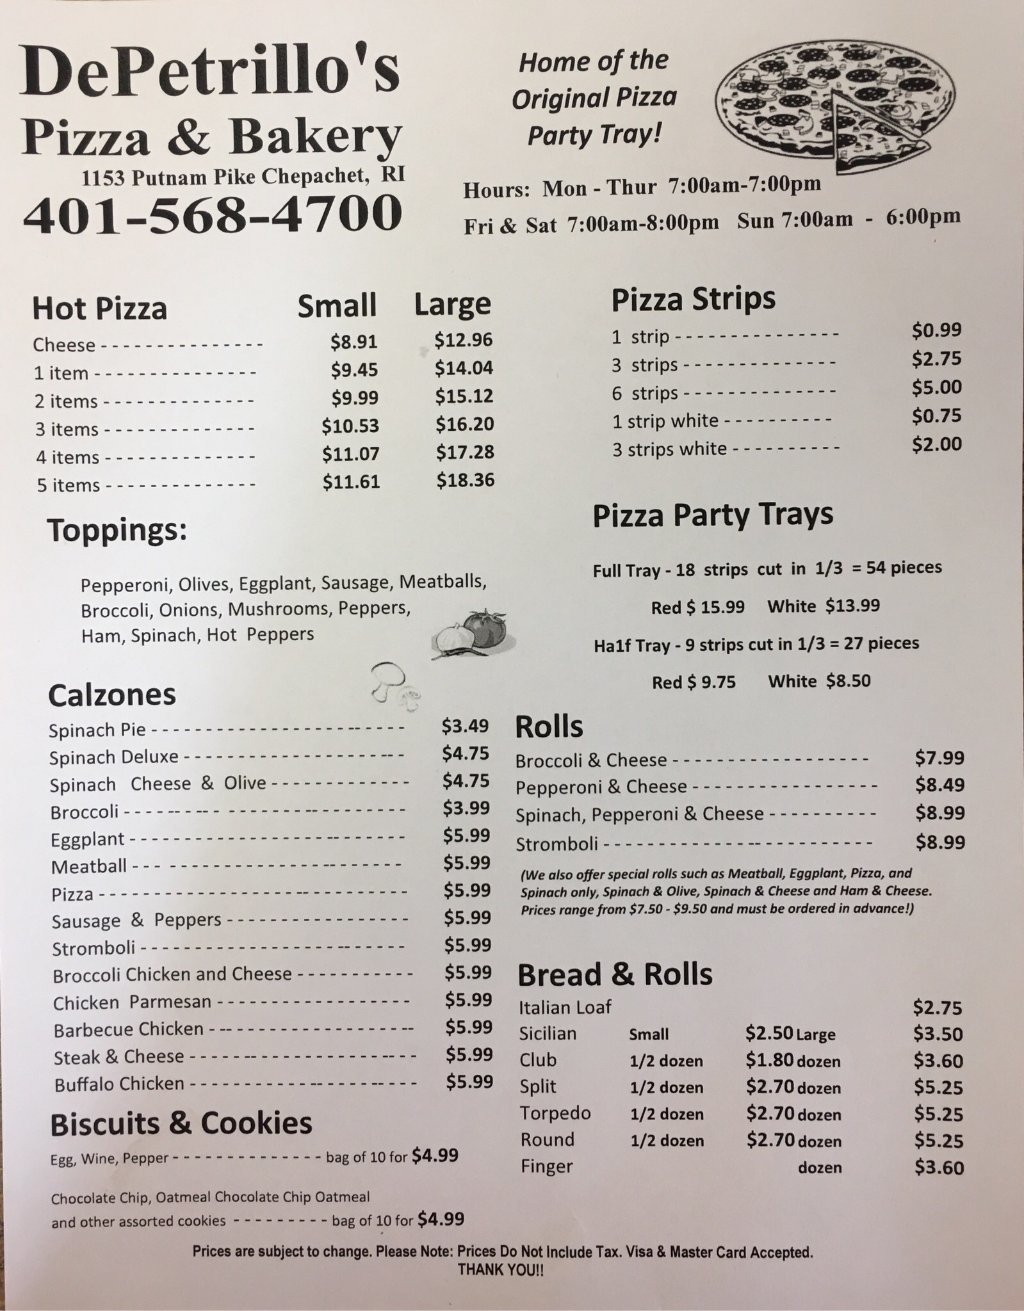 DePetrillos Pizza & Bakery of Glocester